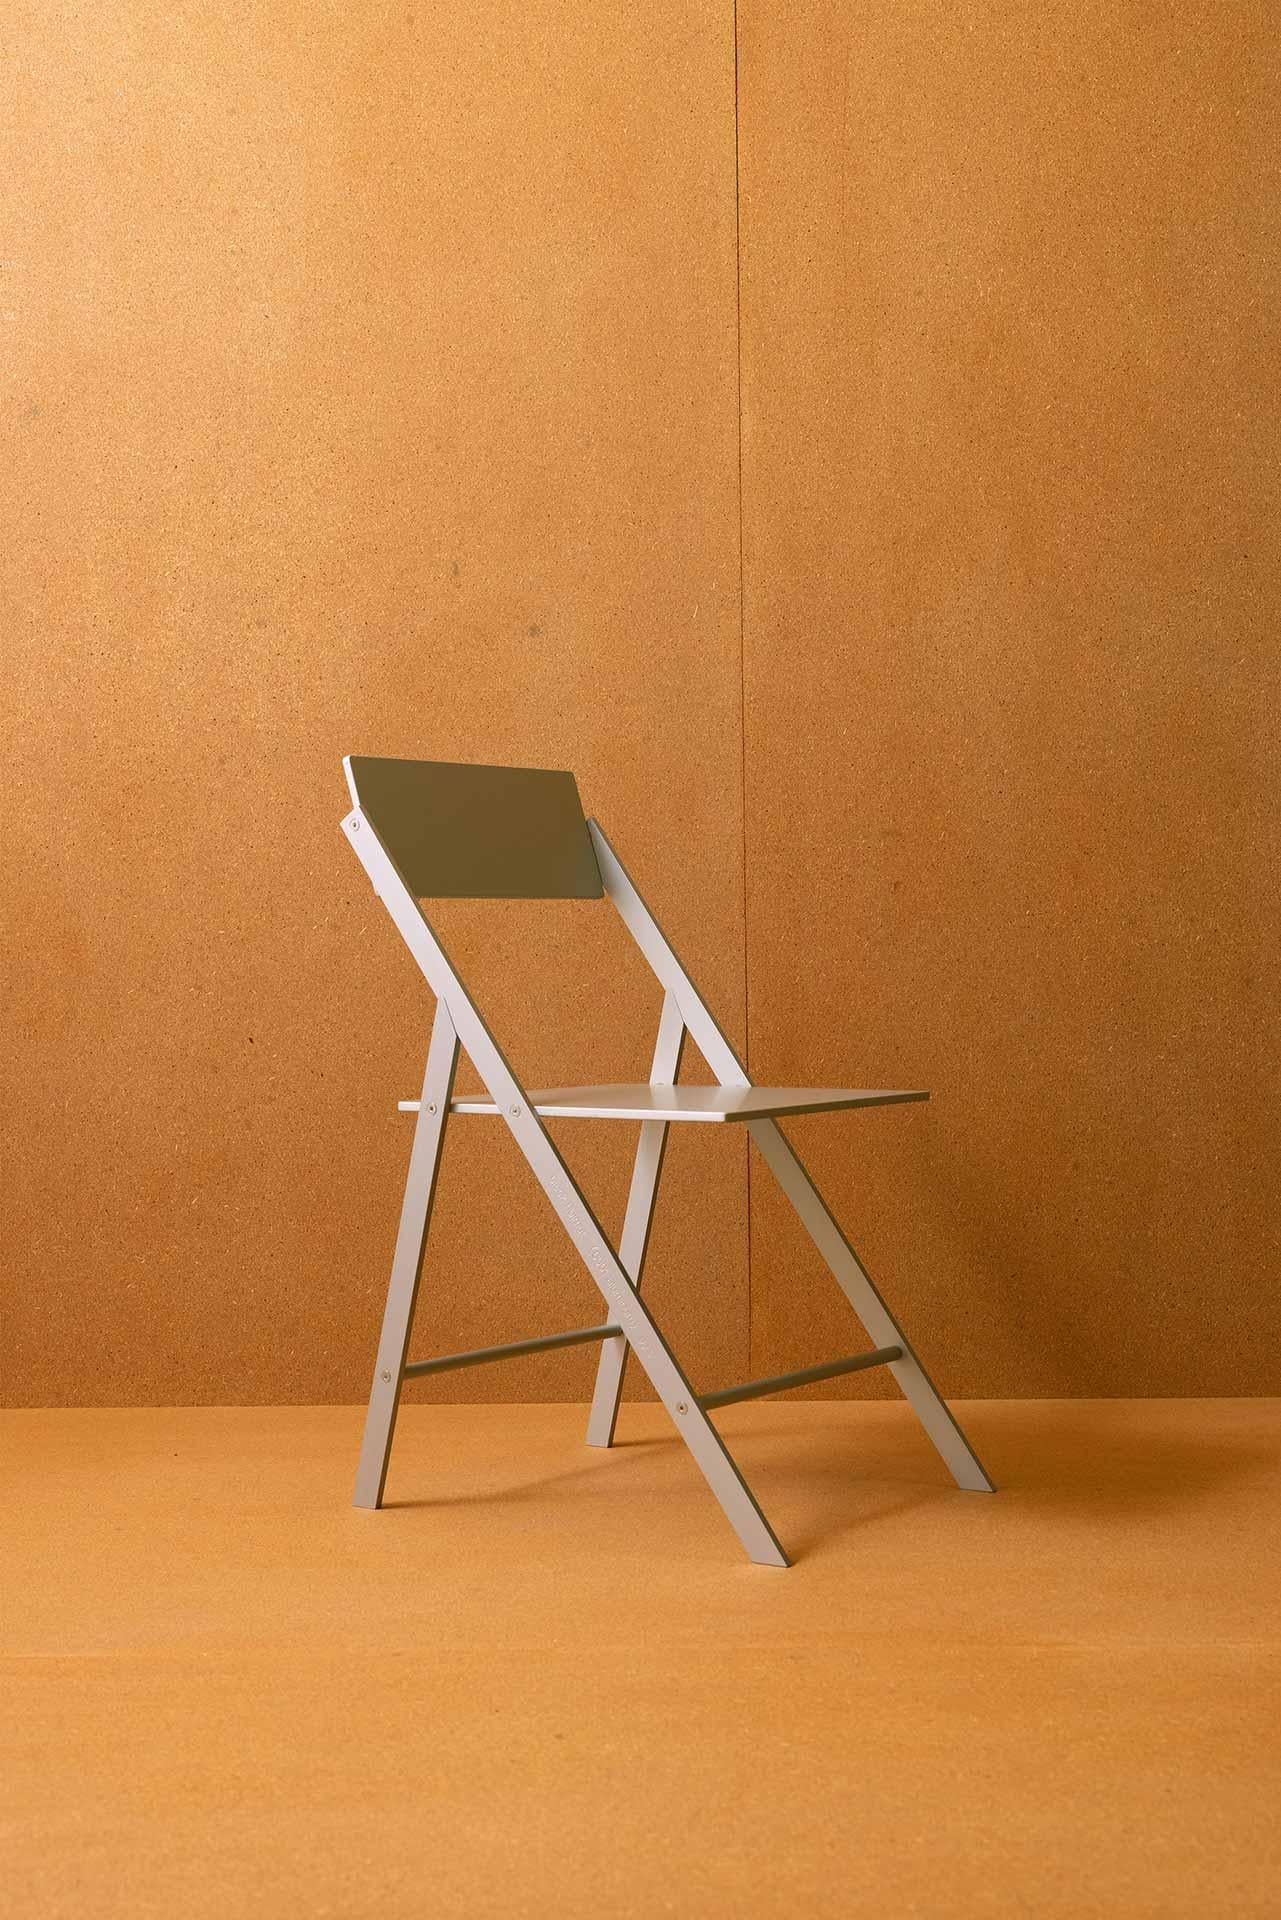 The folding chair by black helmut; the utility of a folding chair reimagined in luxury materiality and post-modern form. 

clear anodized “macbook” finish

solid 6061 aluminum structure, aluminum seat, swiveling back rest, anodized finish. each